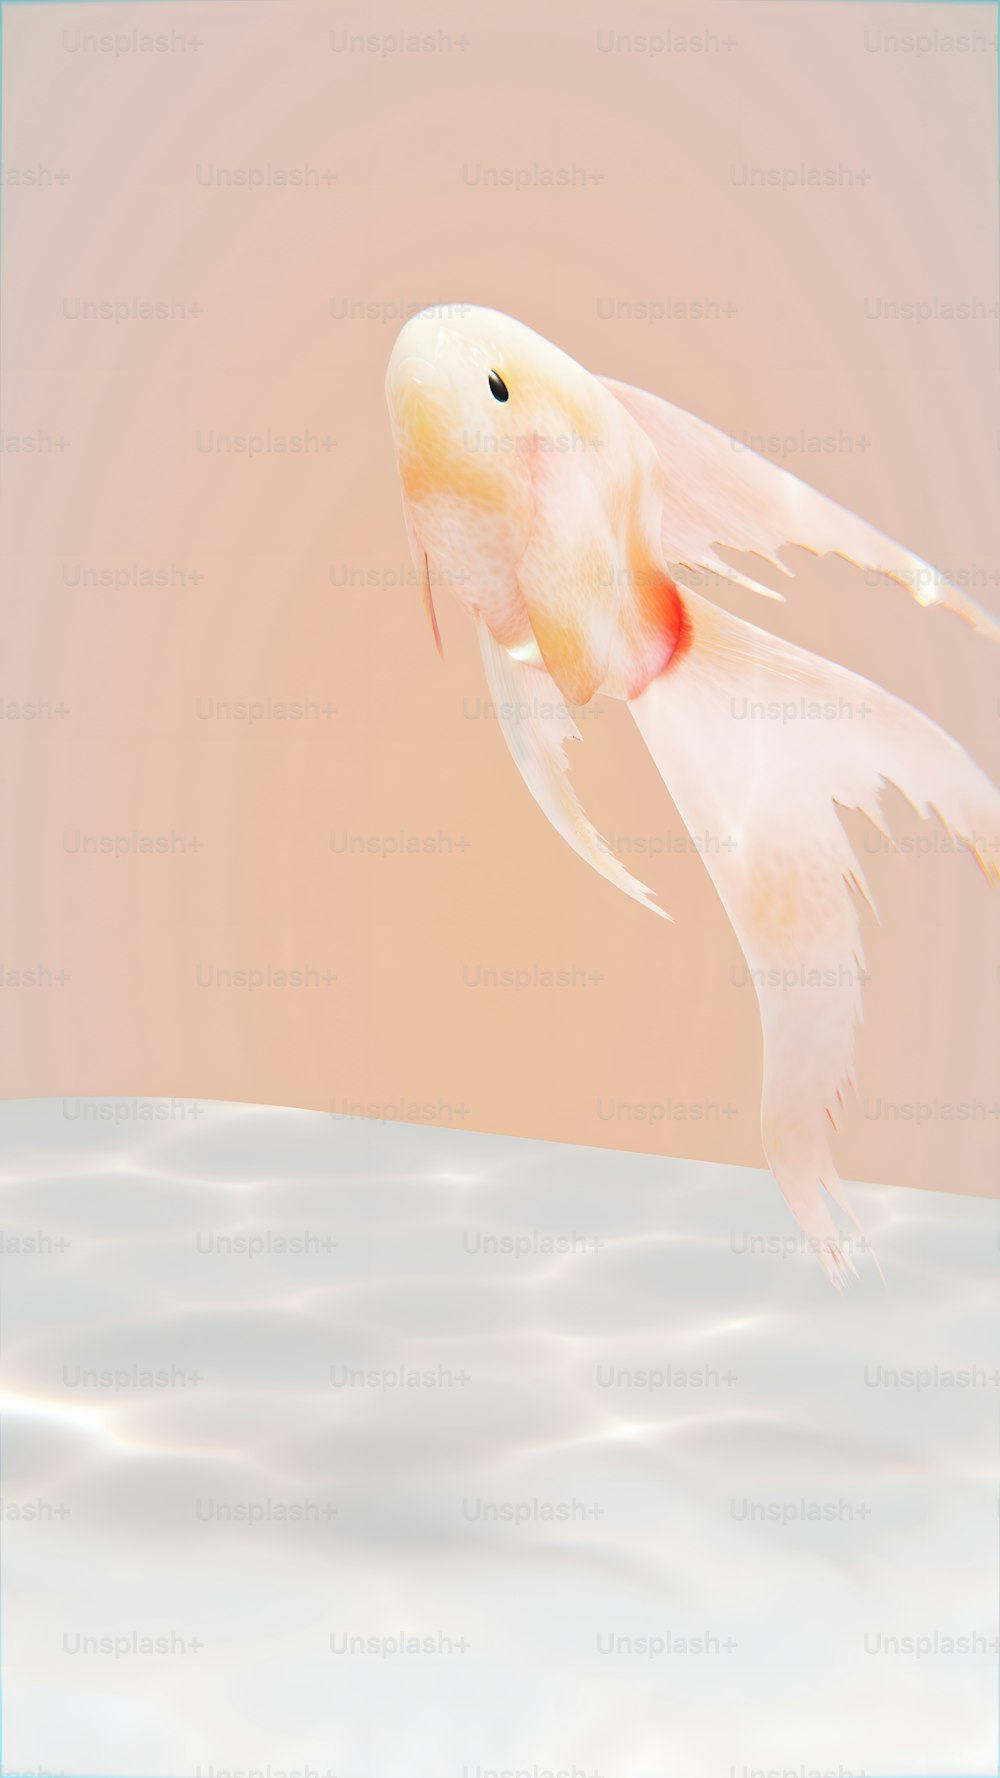 a goldfish in flight with a pink background